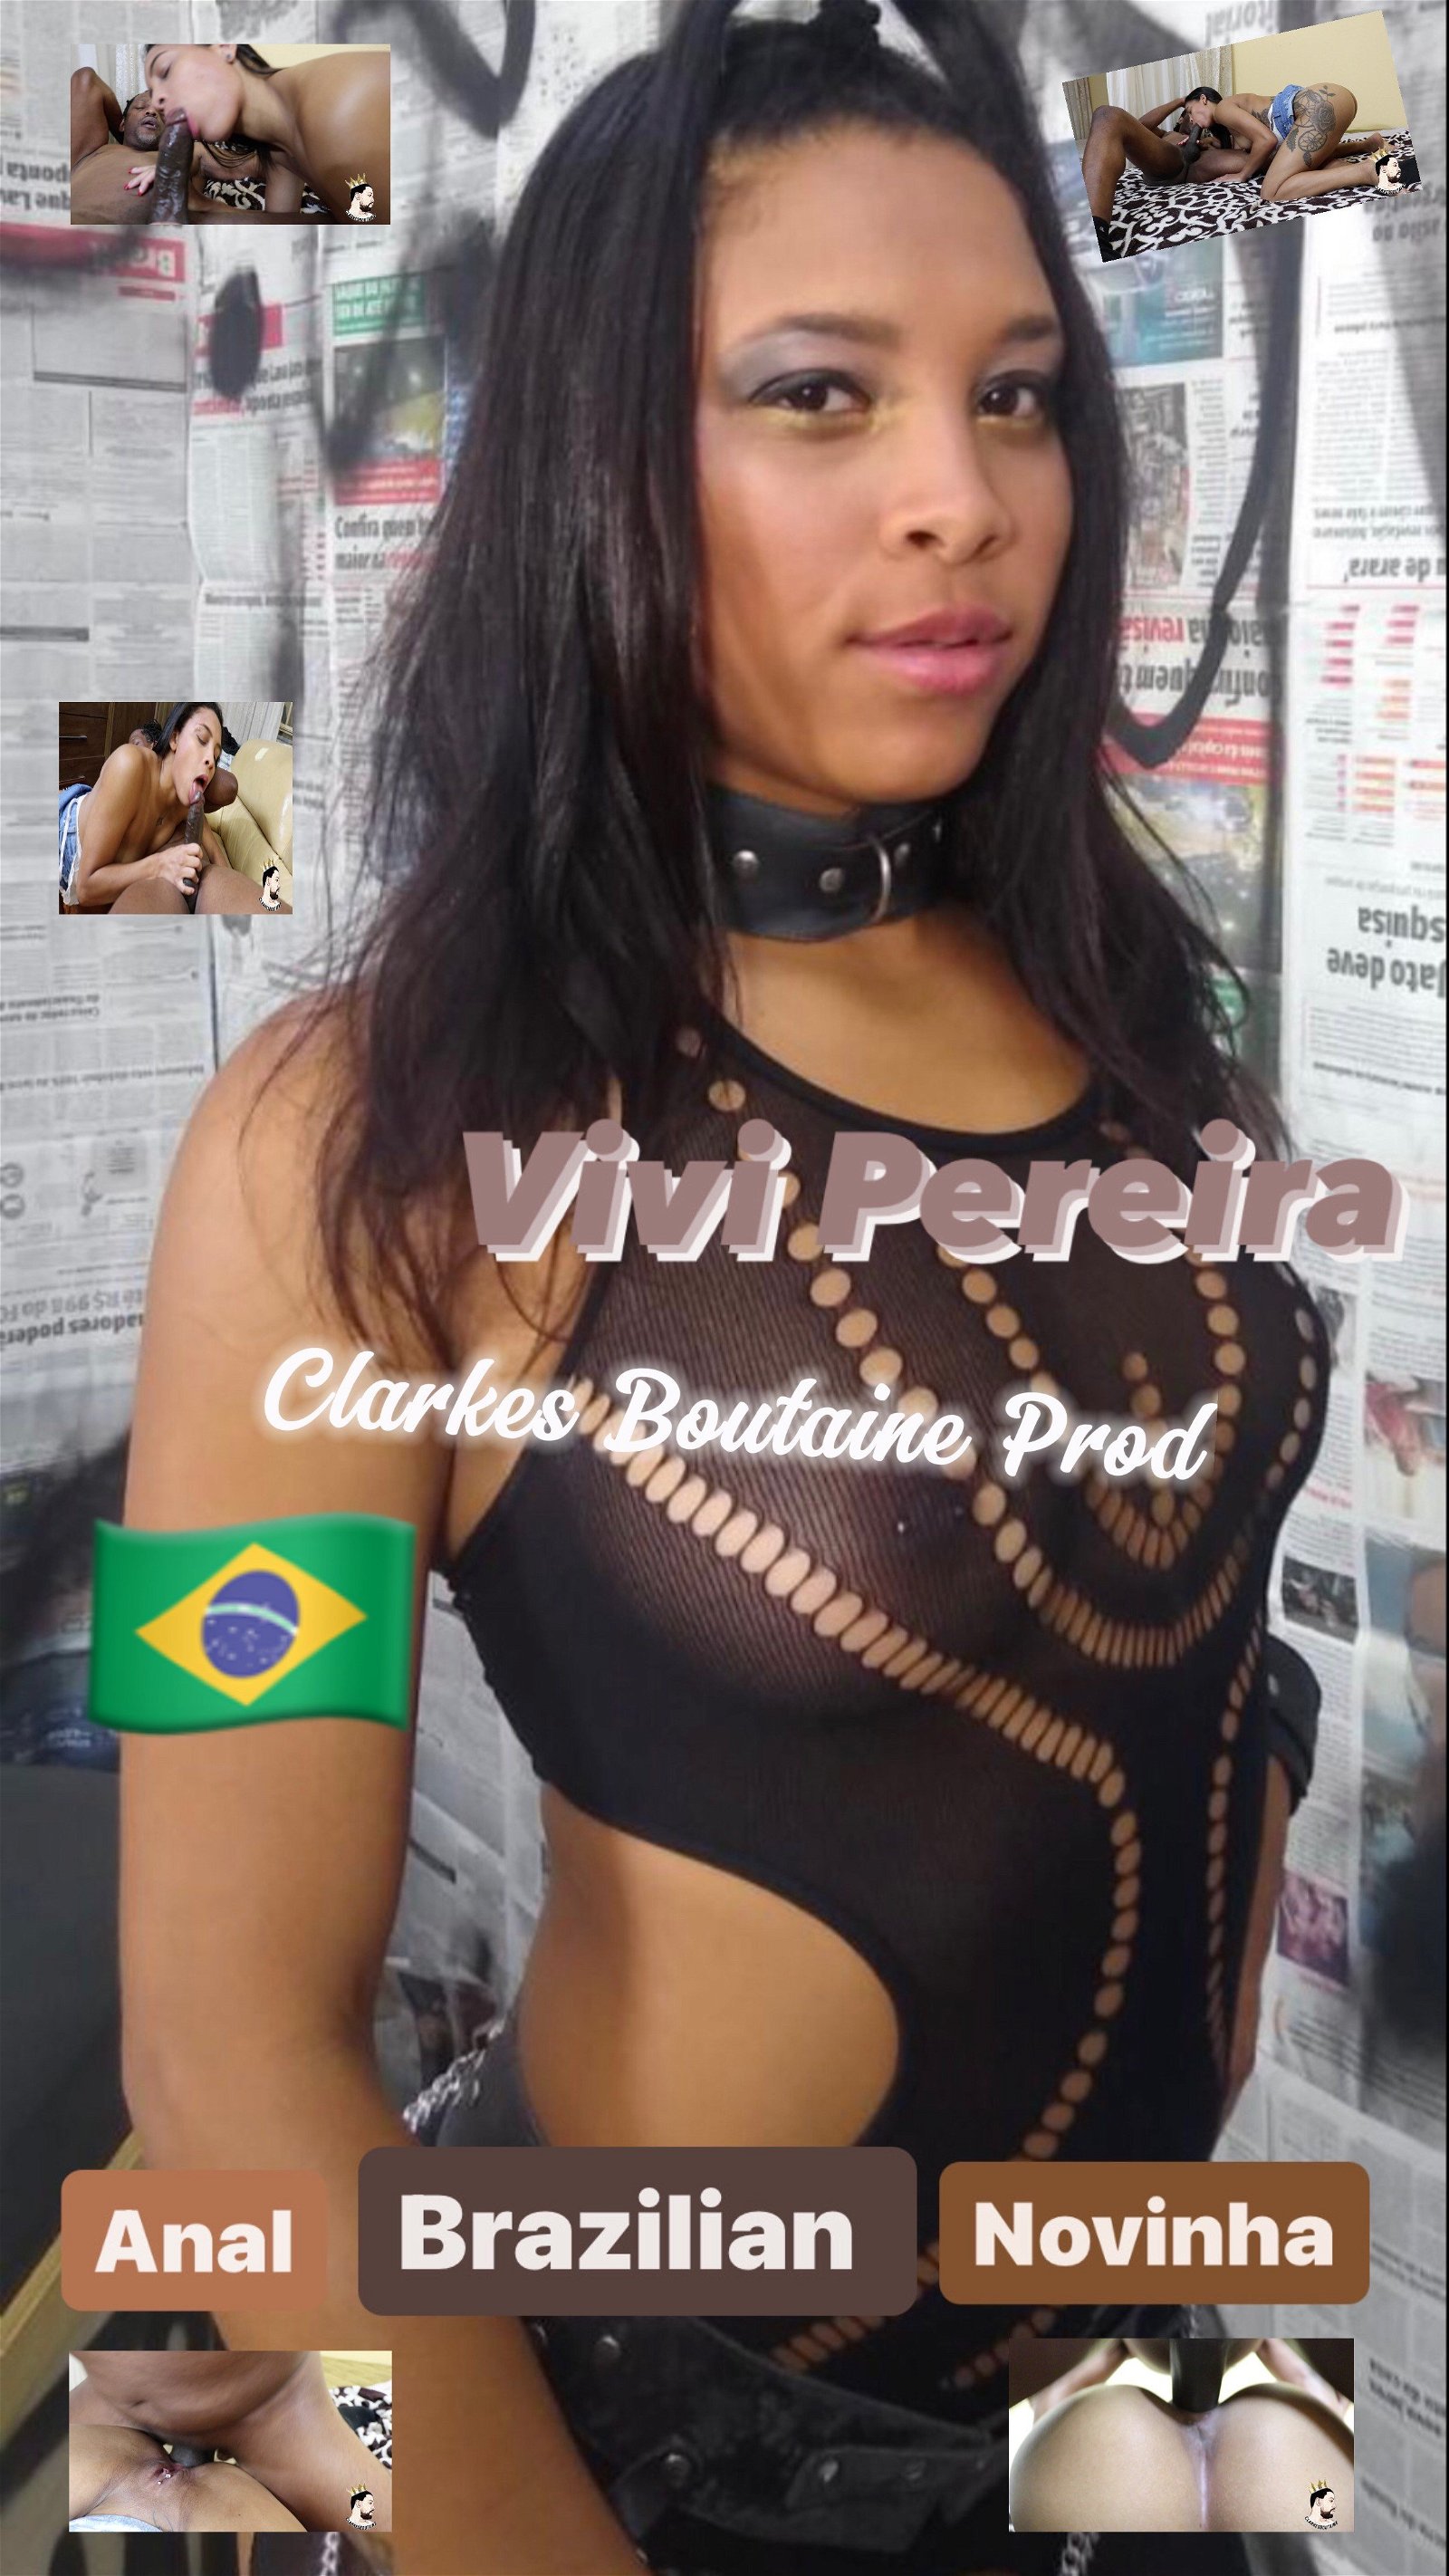 Watch the Photo by Clarkes Boutaine with the username @ClarkesBoutaine, who is a star user, posted on December 15, 2023 and the text says 'I'm Clarkes Boutaine I am a Porn Content Creator living in Brazil filming with Brazilian and in the USA add me to your profile.

I post new links and content daily for FREE!!

Follow me on Telegram group link: 
https://t.me/CBoutaine  
or join my..'